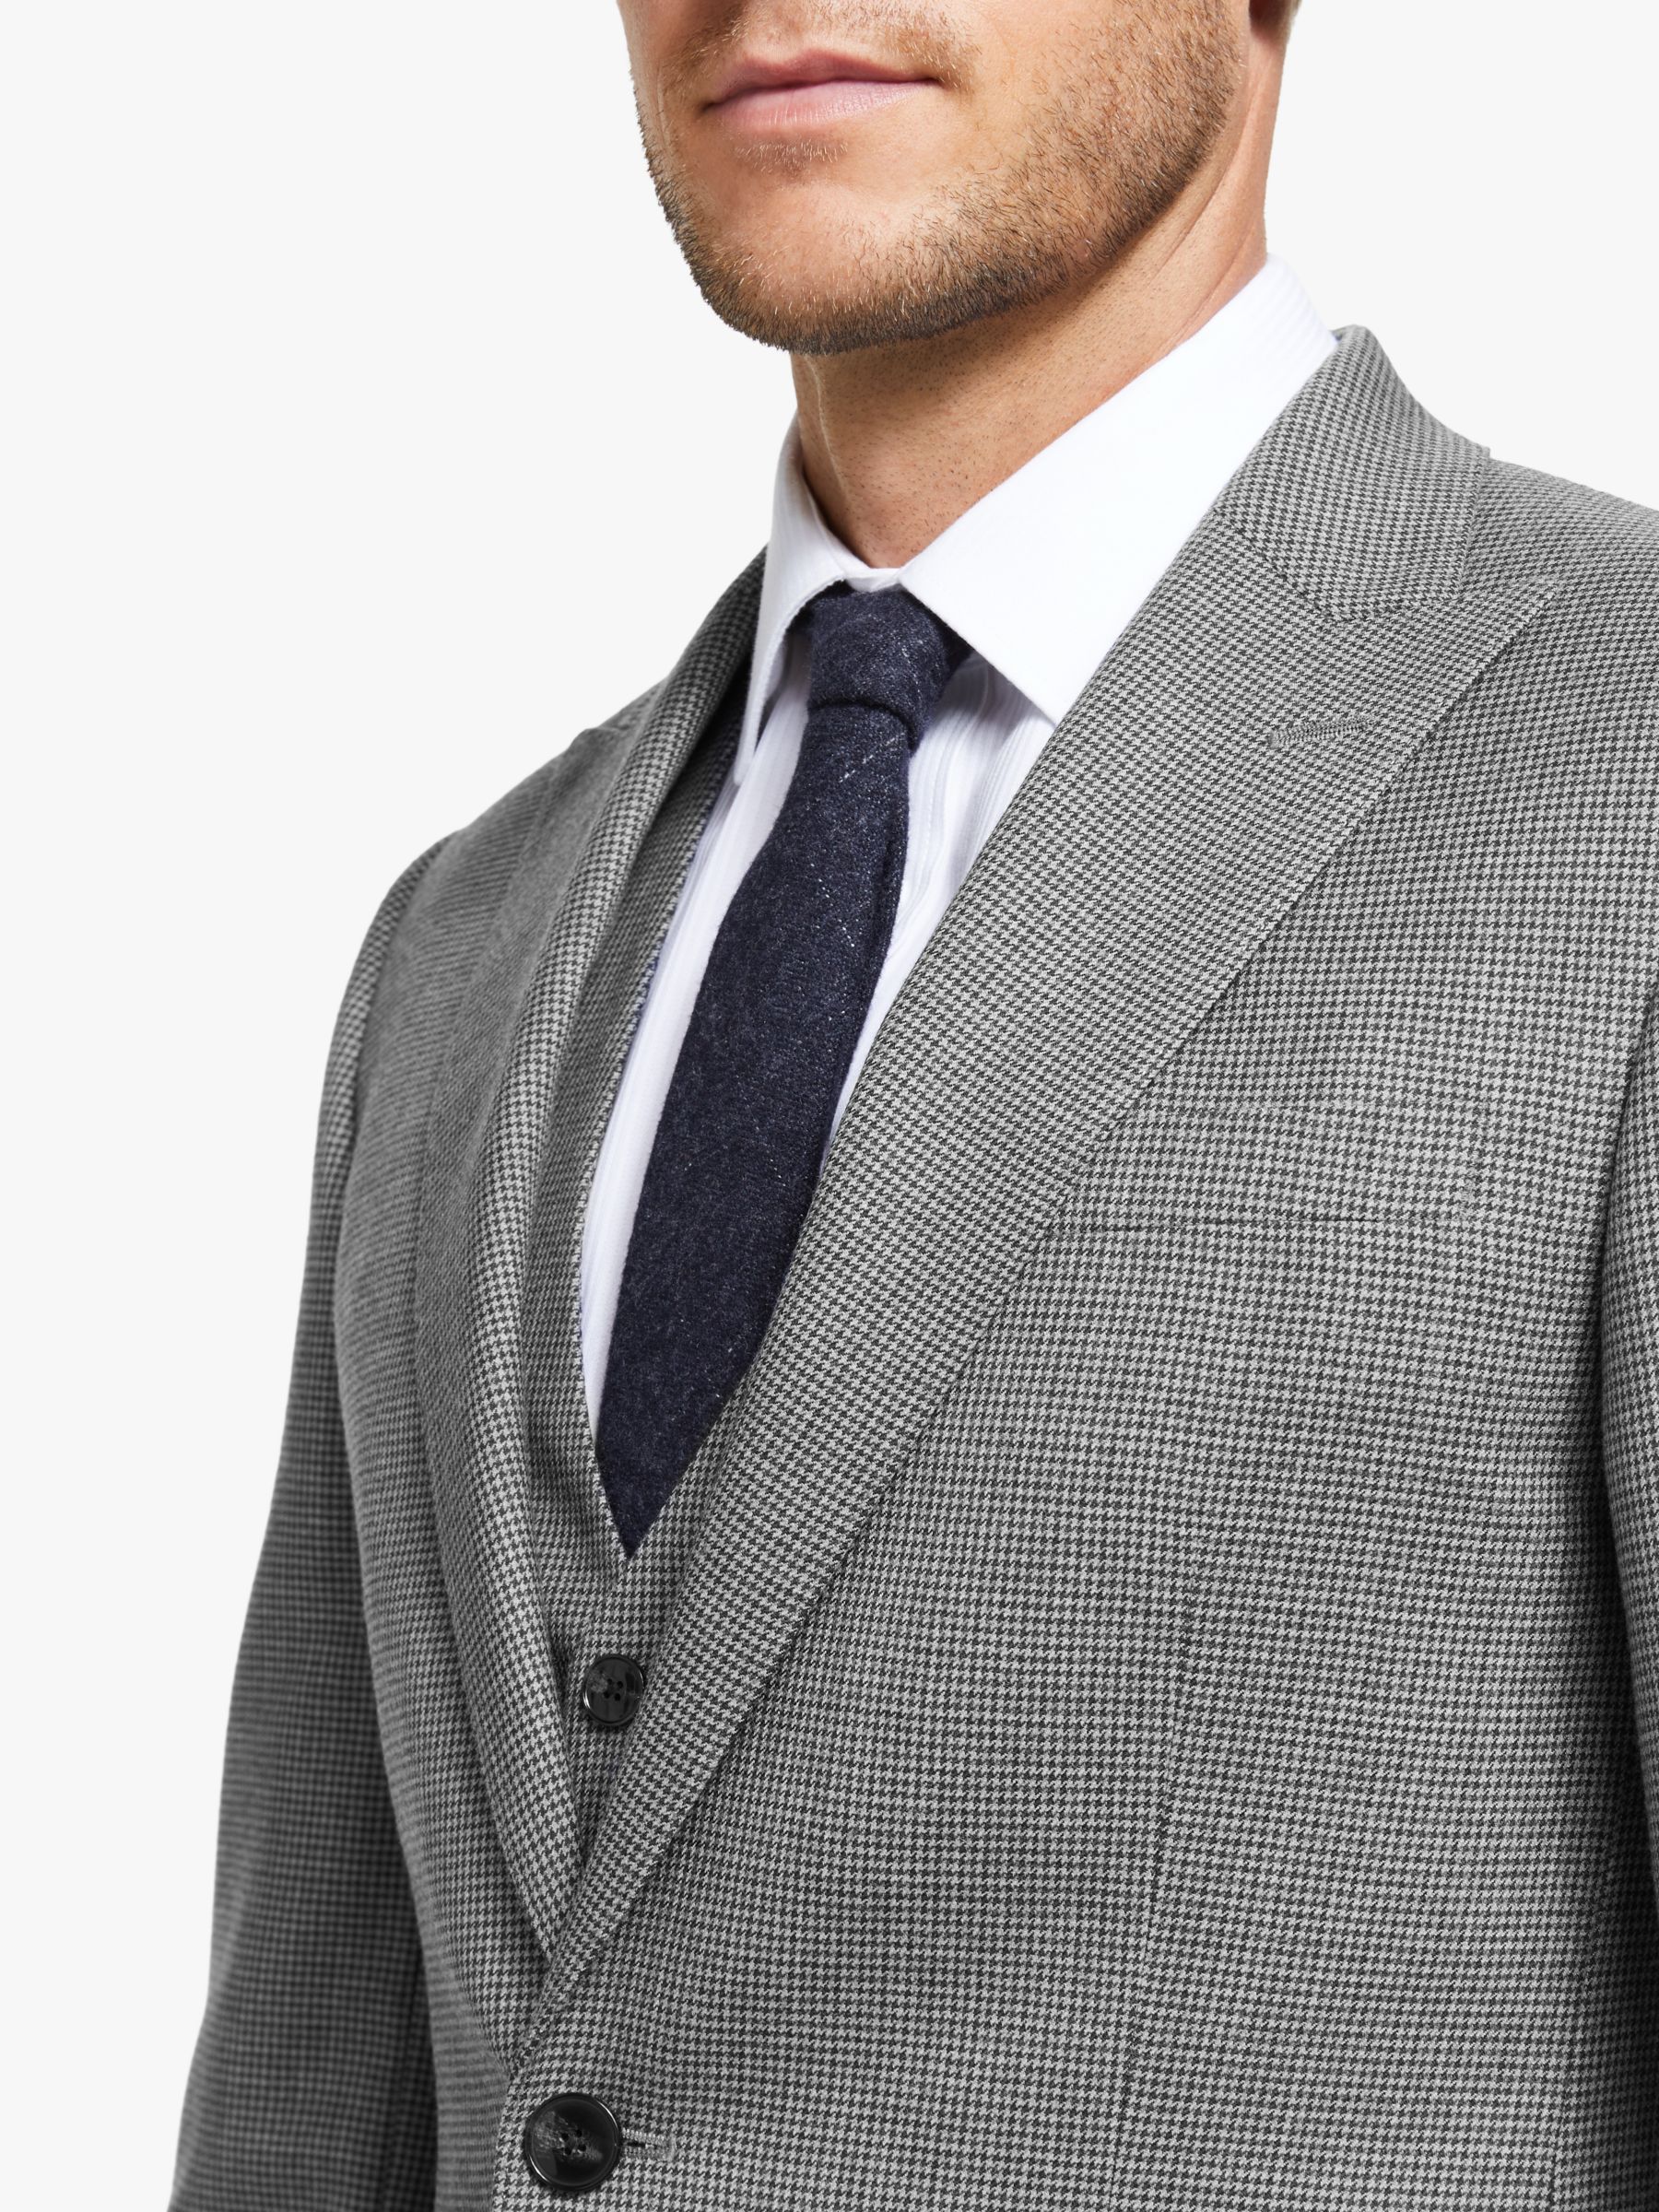 John Lewis & Partners Wool Puppytooth Tailored Fit Suit Jacket, Grey, 42S